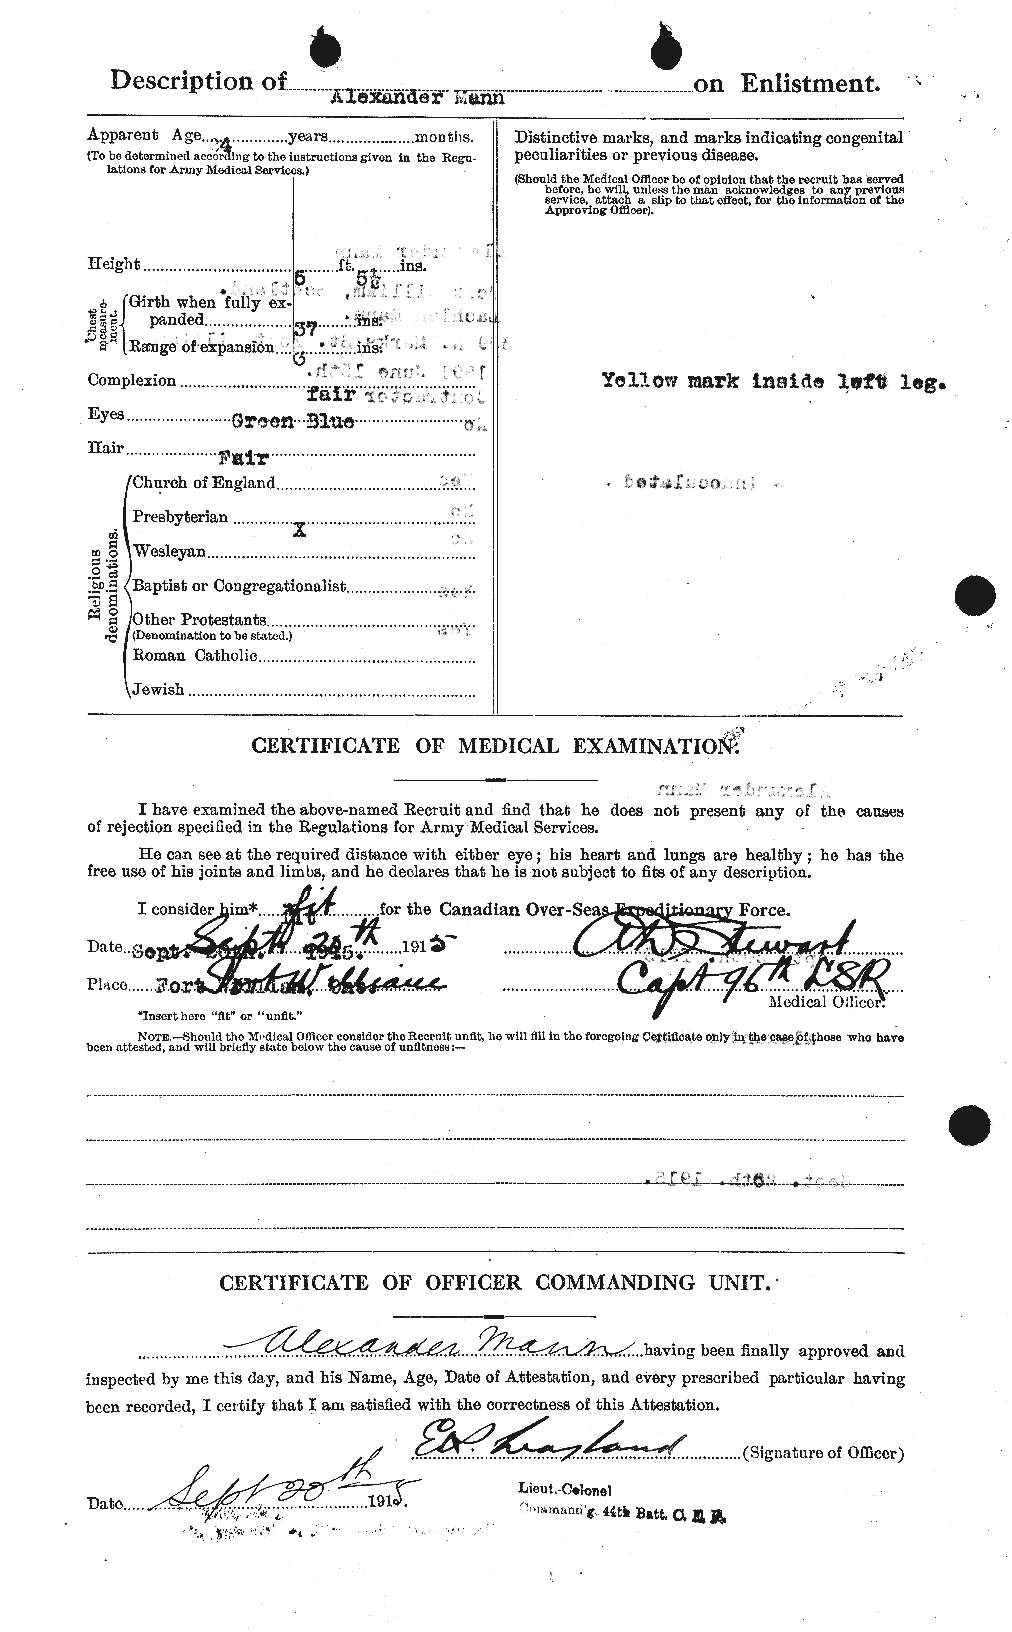 Personnel Records of the First World War - CEF 477064b